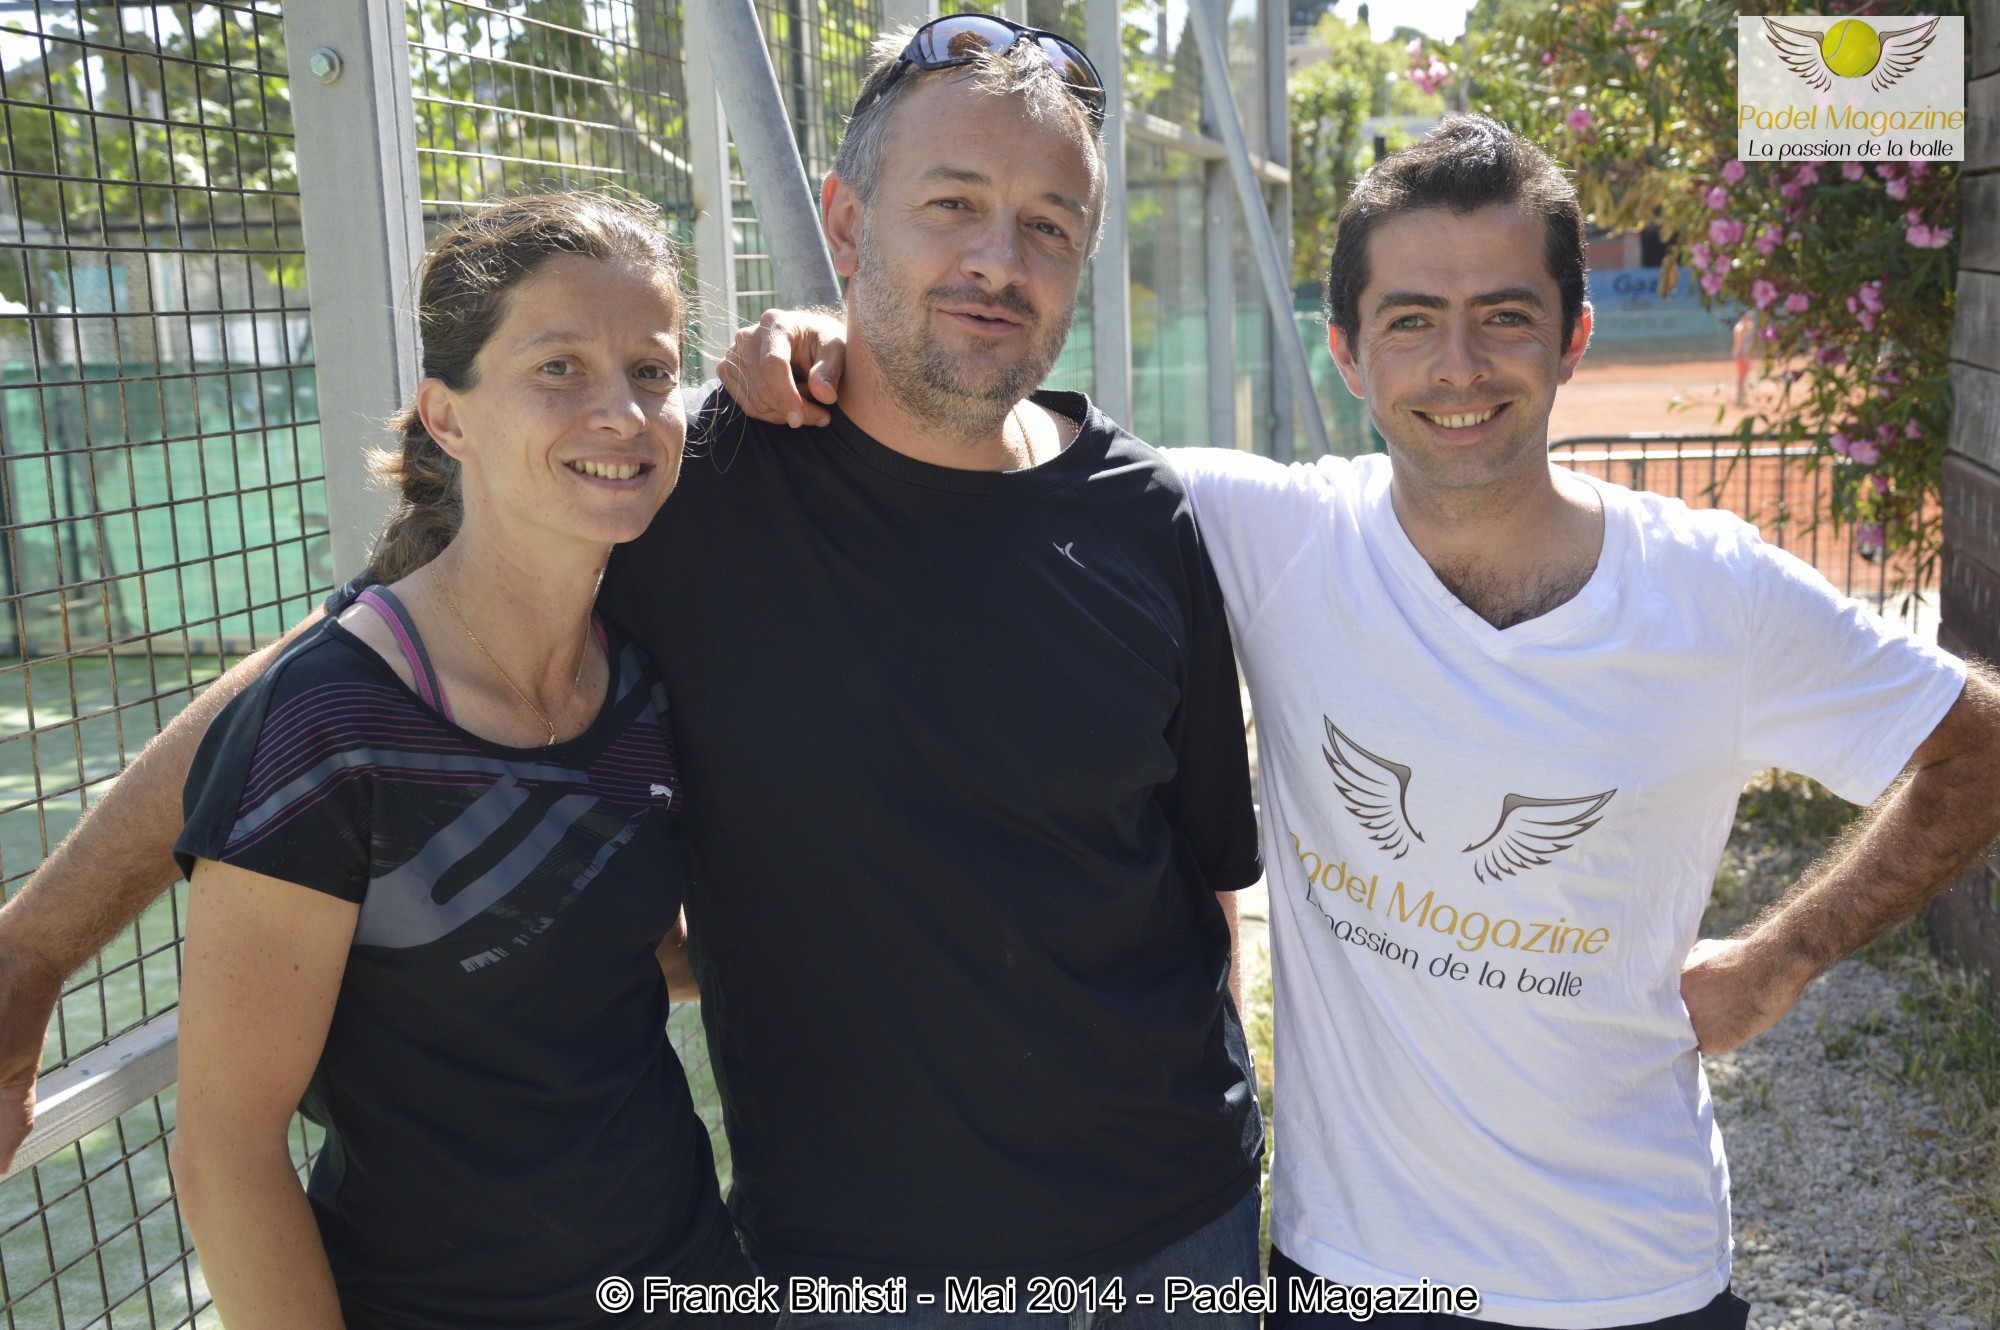 "The Padel Club de Marseille who want more ”